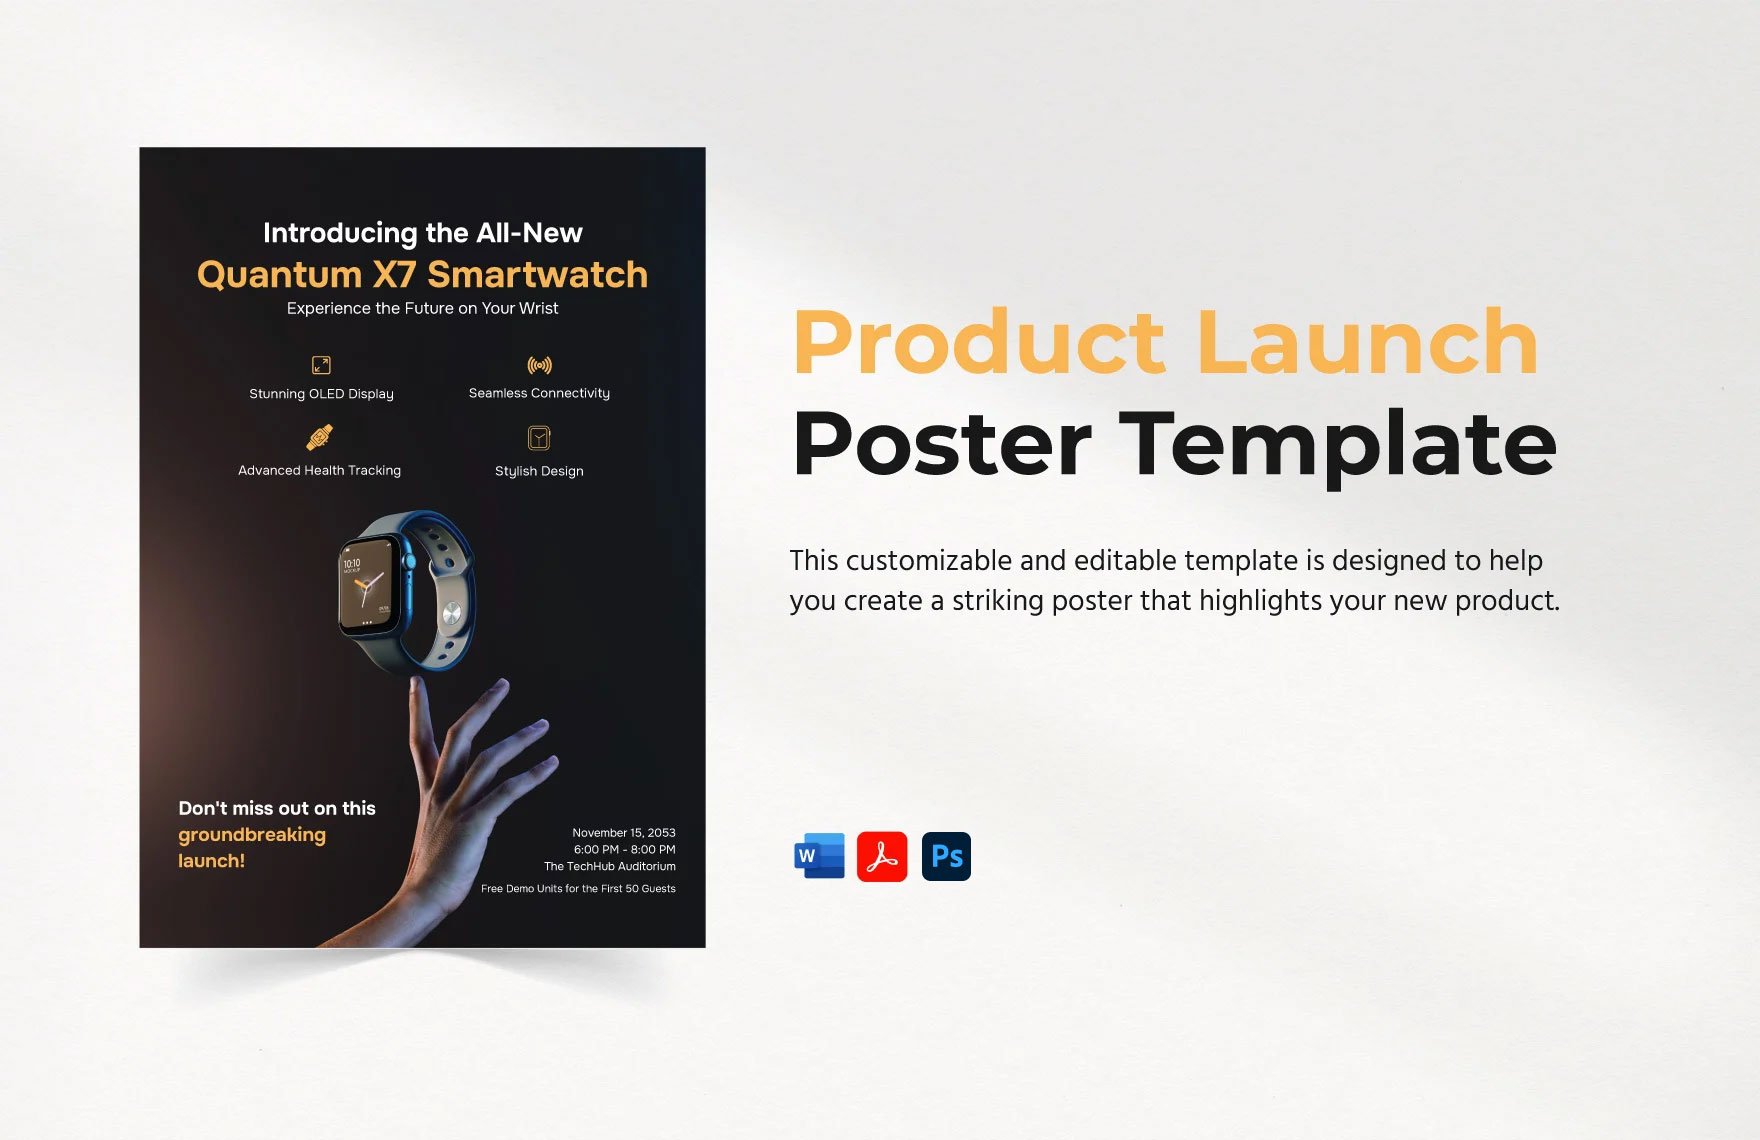 Product Launch Poster Template